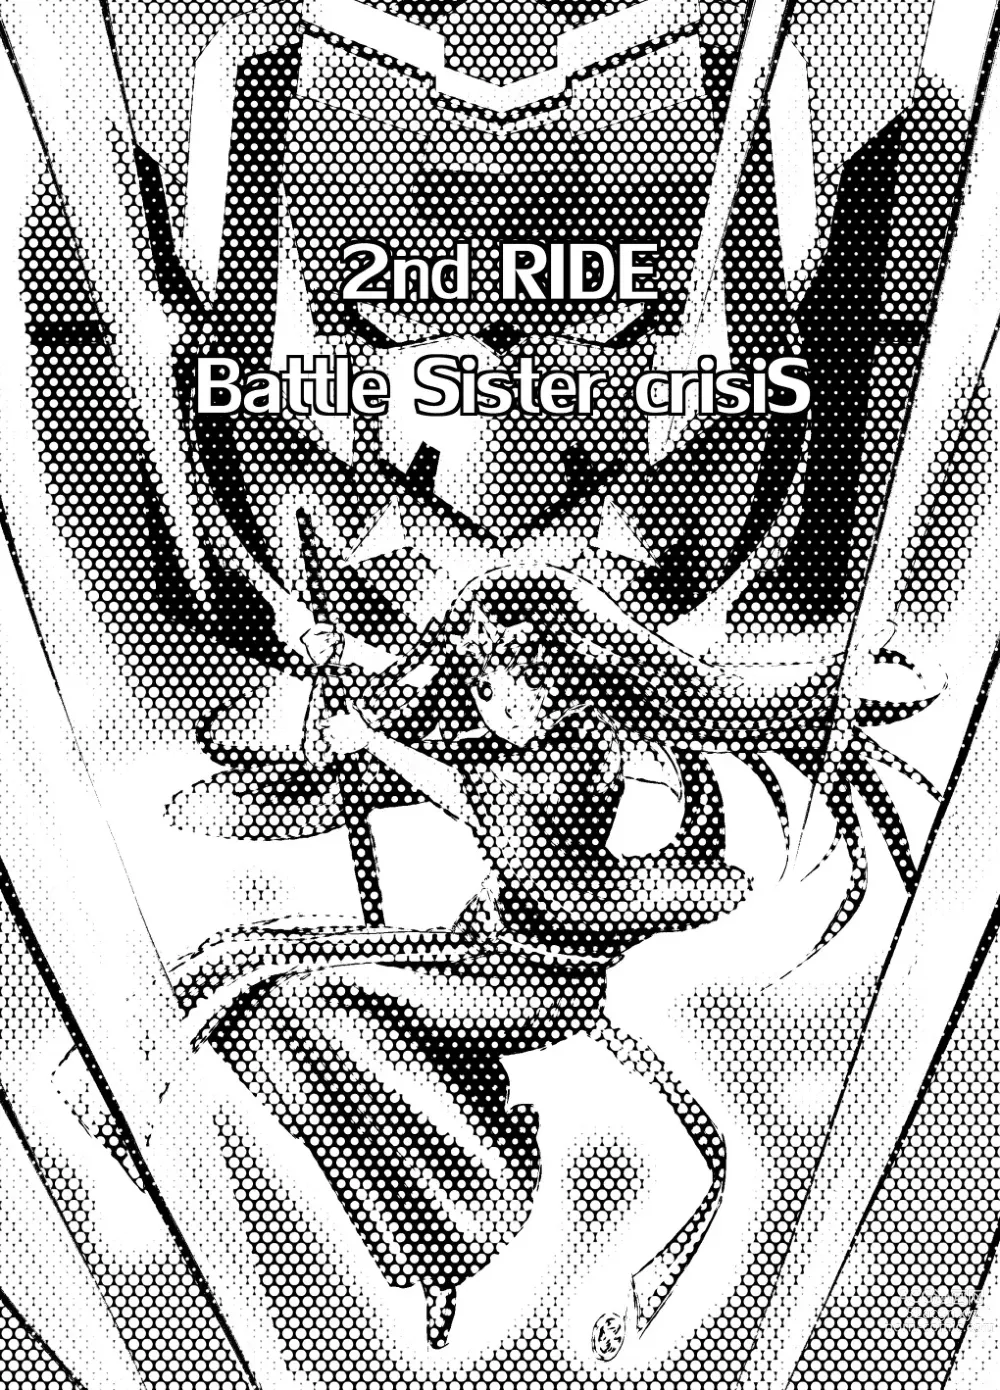 Page 2 of doujinshi 2nd RIDE -Battle Sister crisiS-